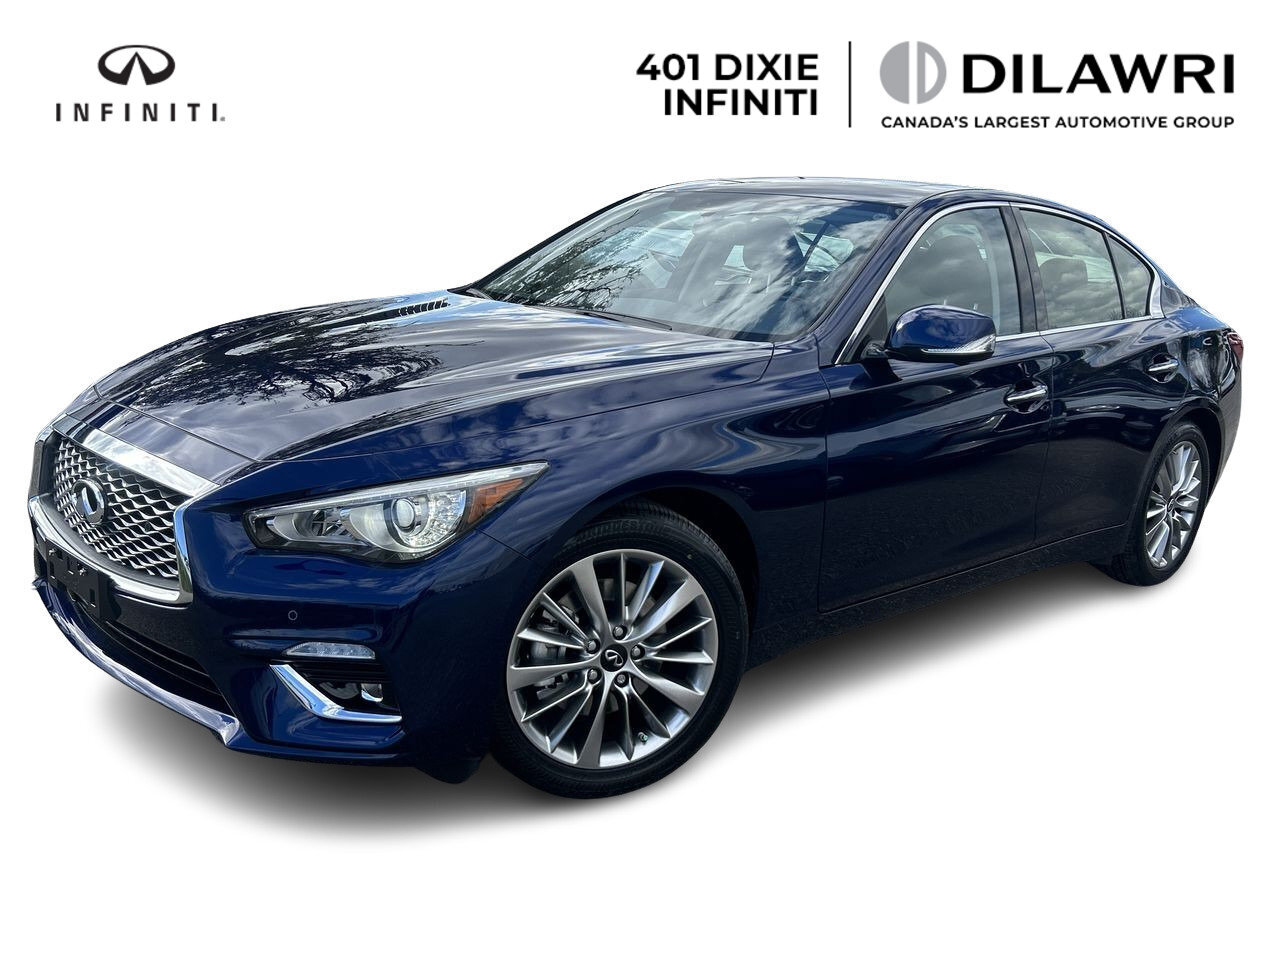 2023 Infiniti Q50 LUXE Rates as low as 0%